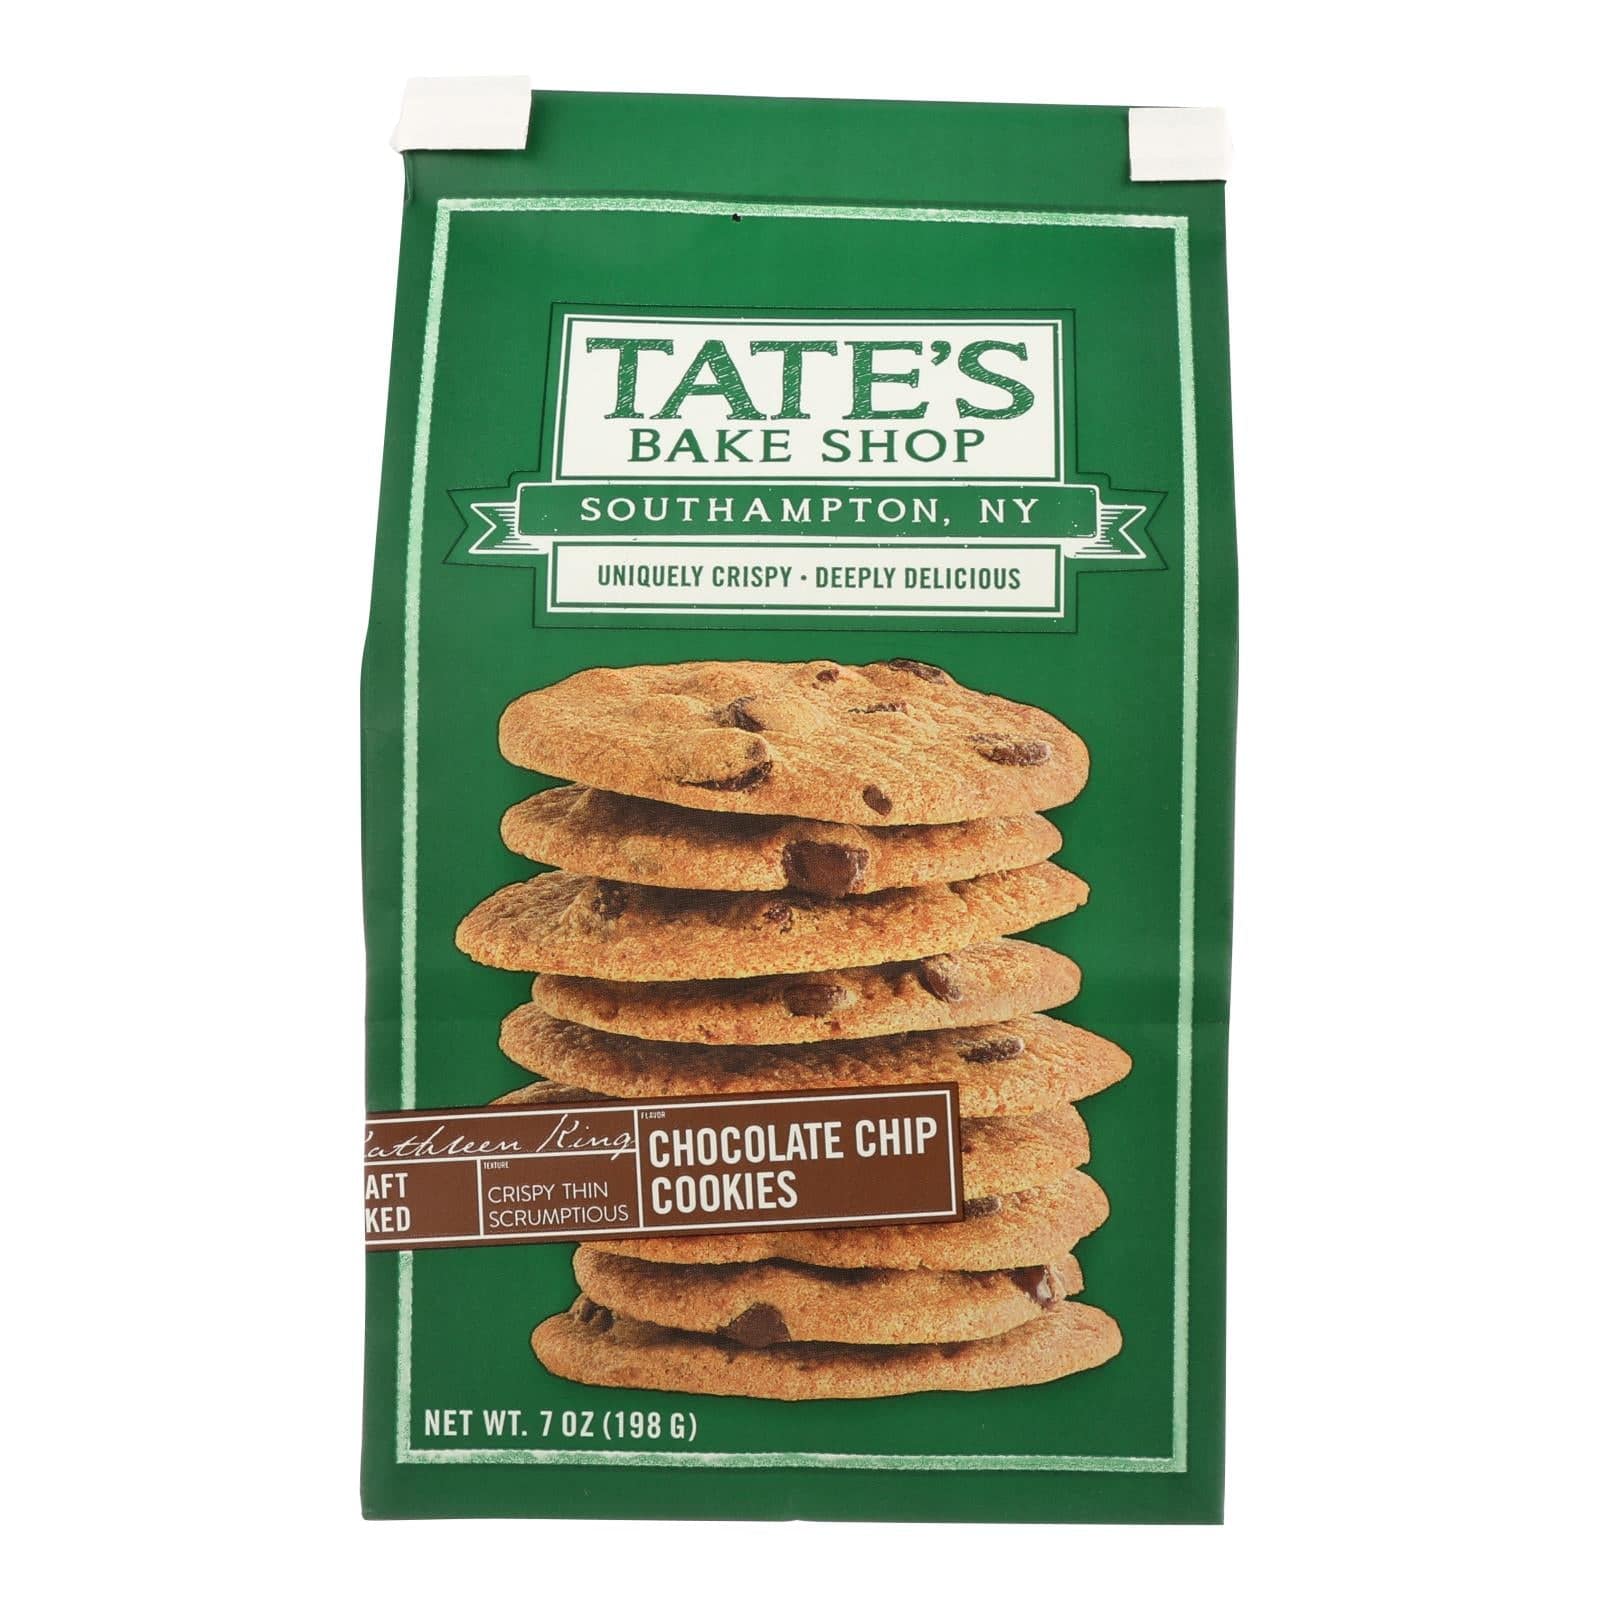 Buy Tate's Bake Shop Double Chocolate Chip Cookies - Case Of 12 - 7 Oz.  at OnlyNaturals.us